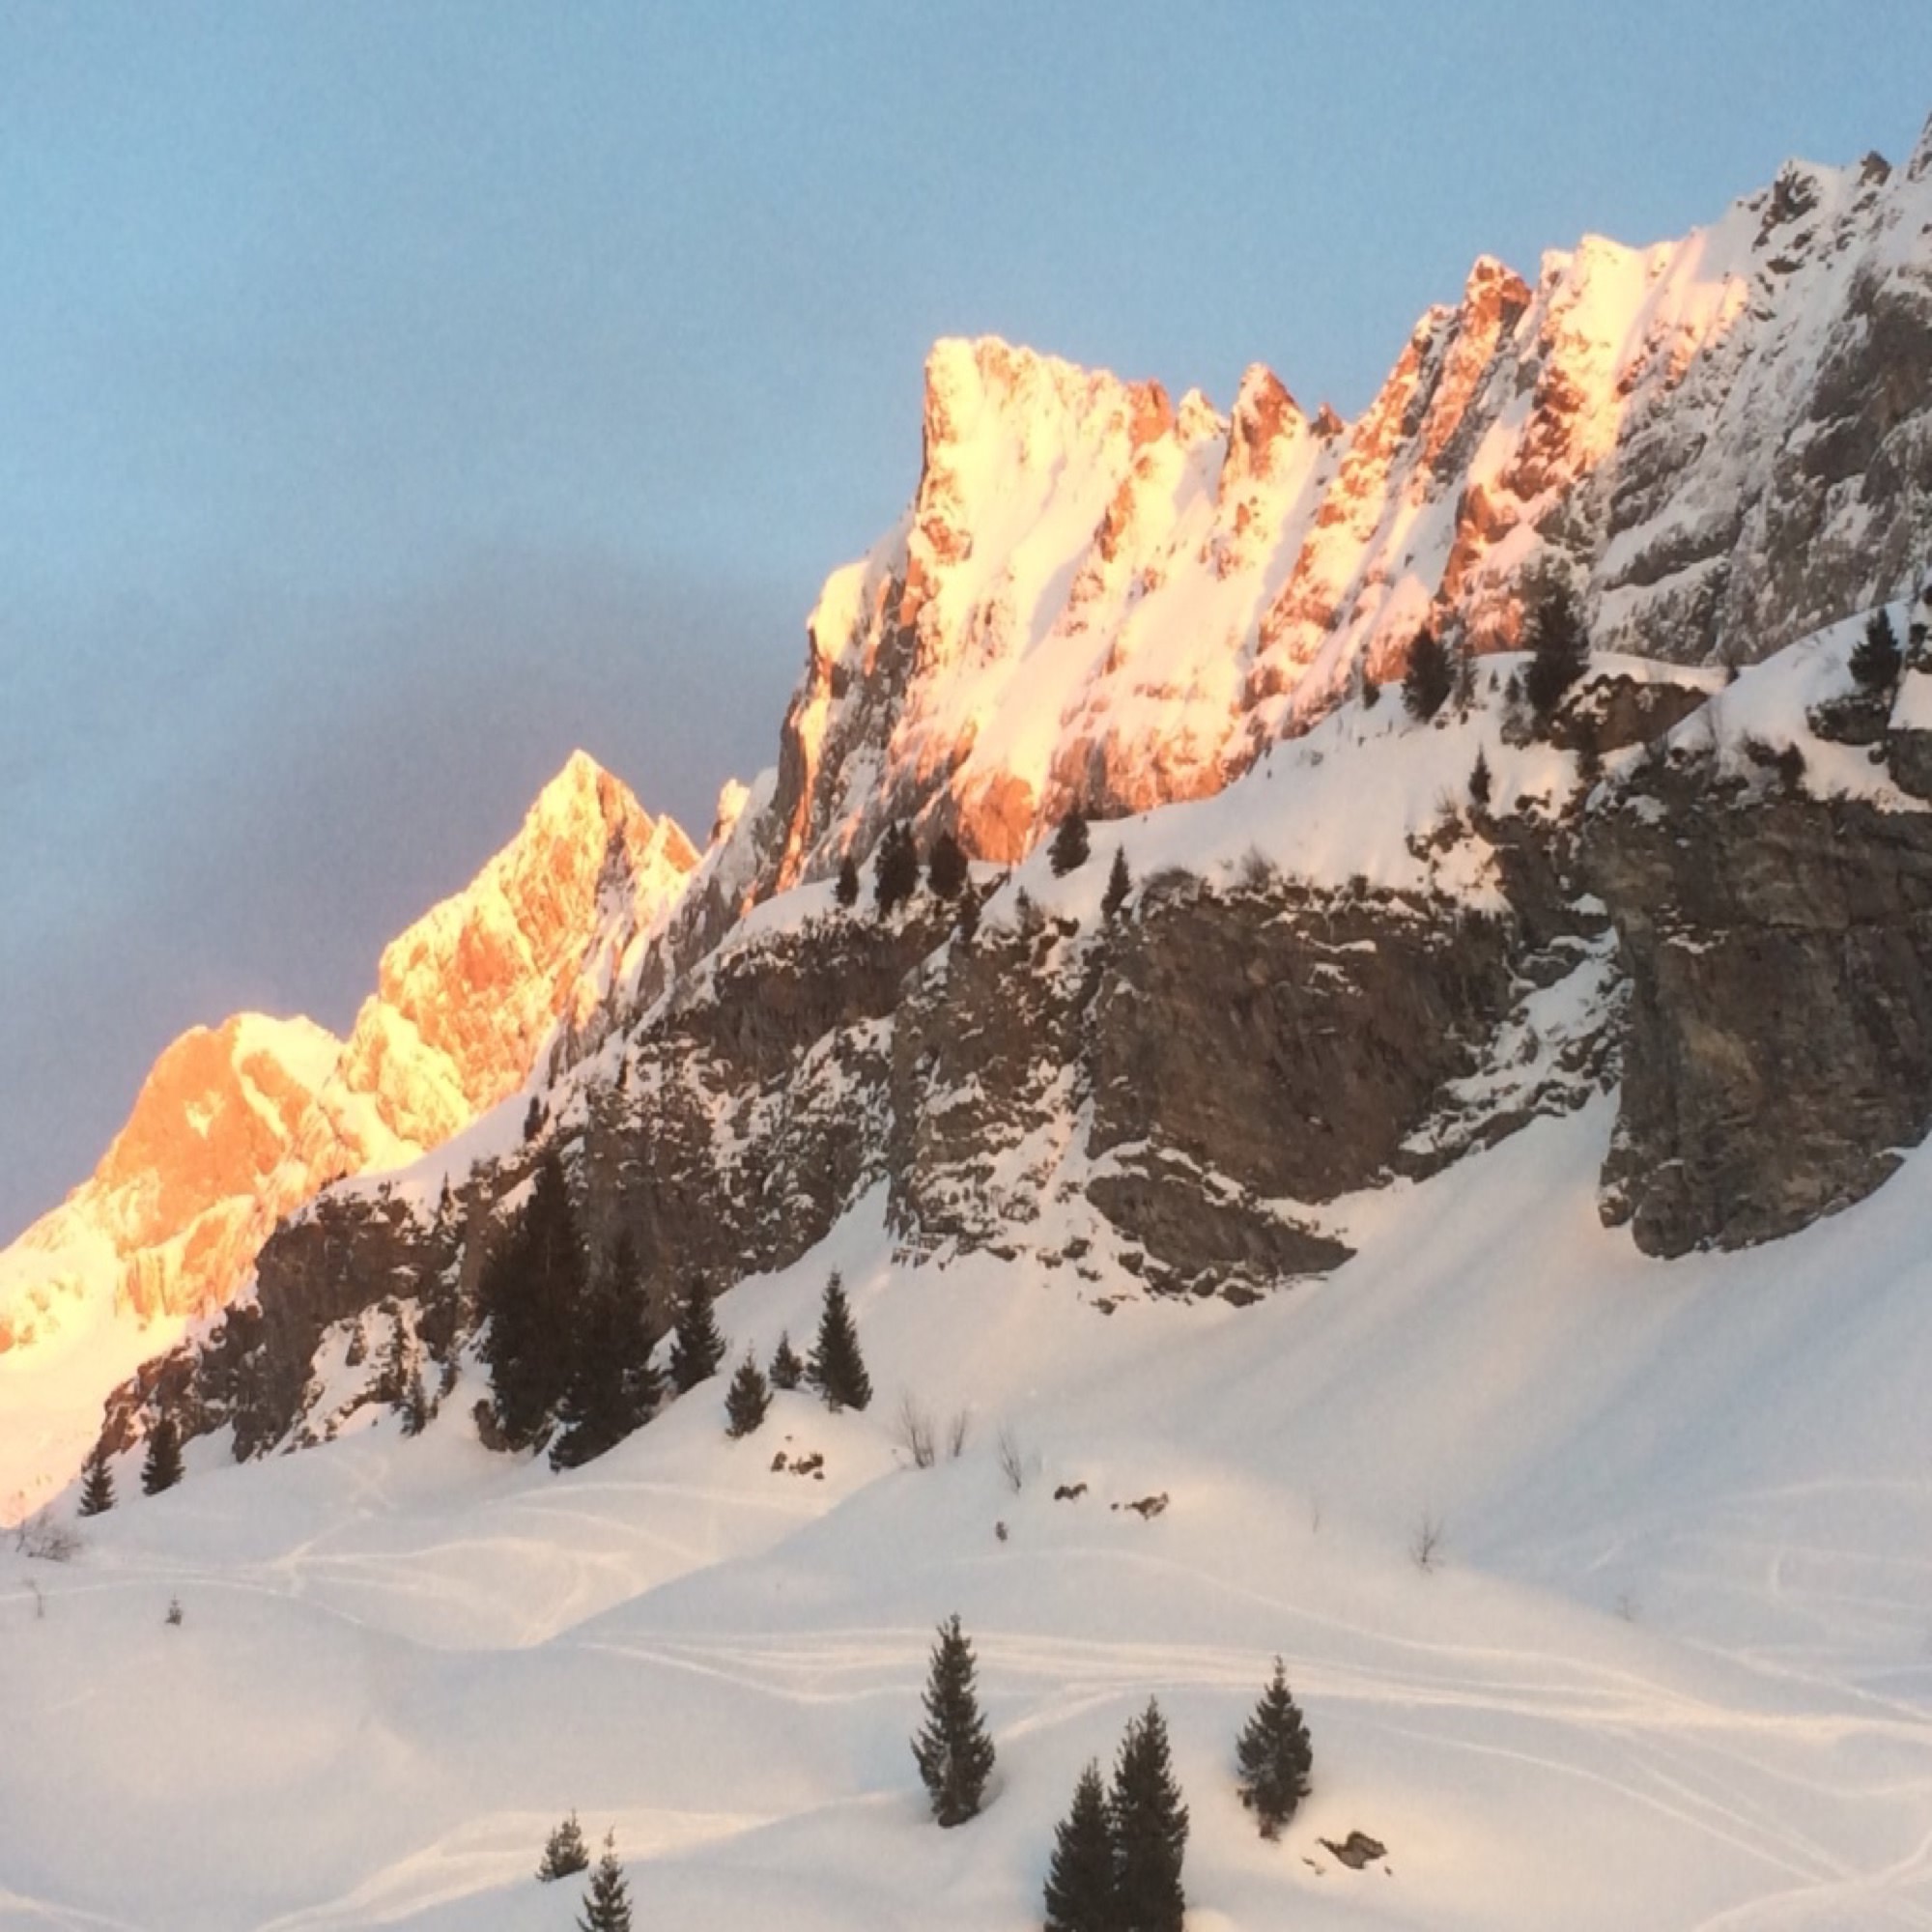 Watching the sun set over Les Dents Blanches